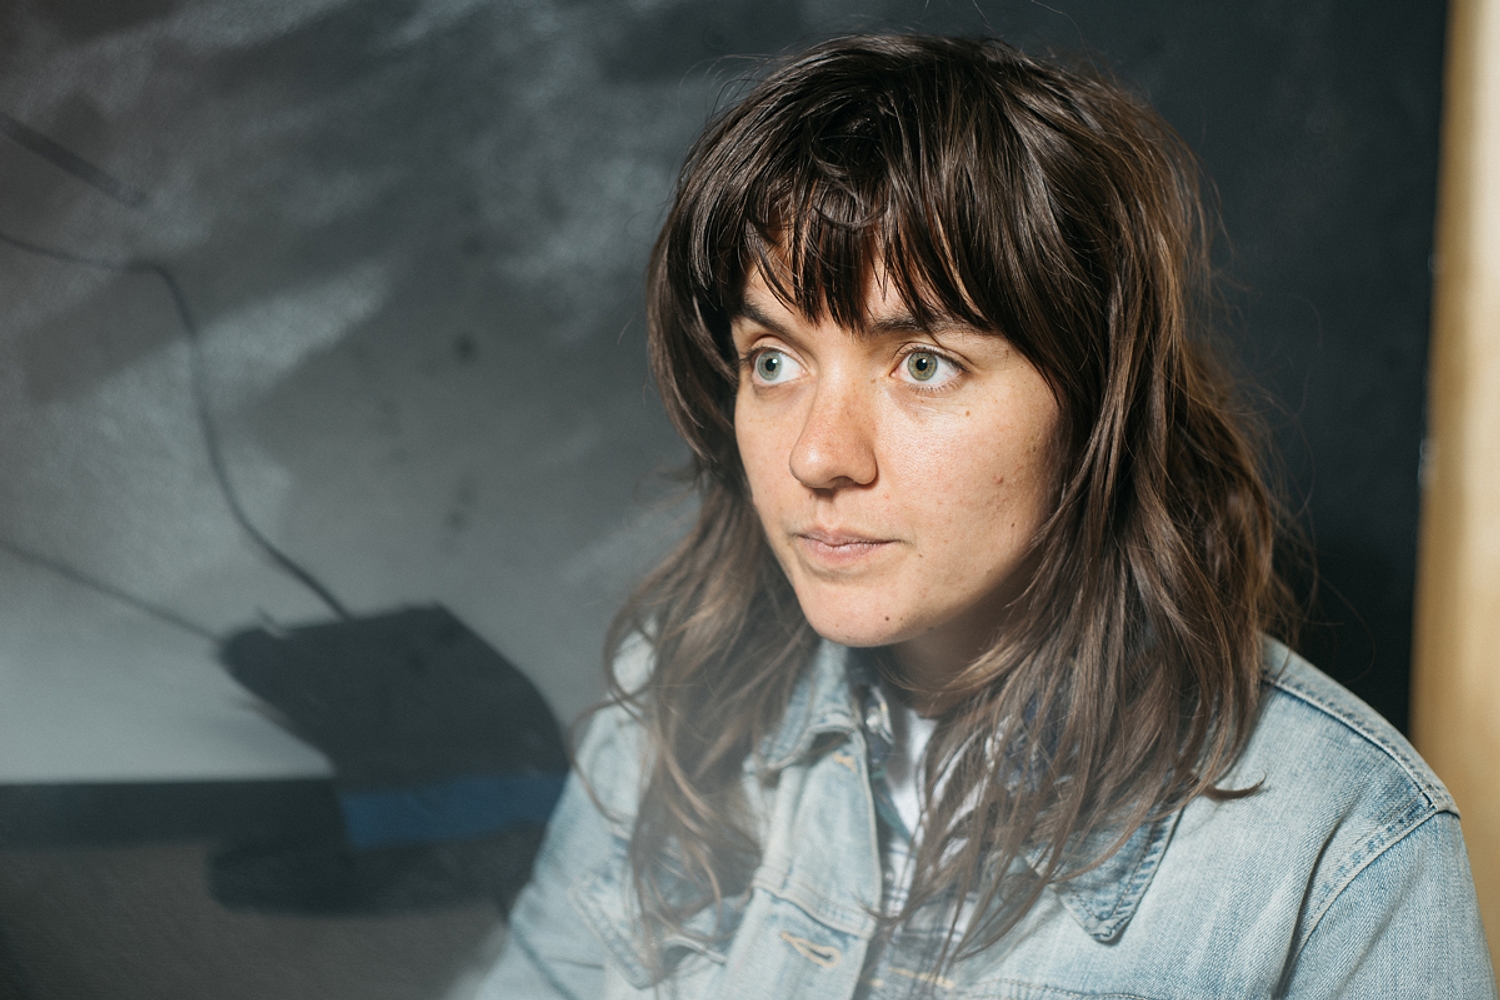 Courtney Barnett: “It’s like turning my brain inside out and showing it to everyone”